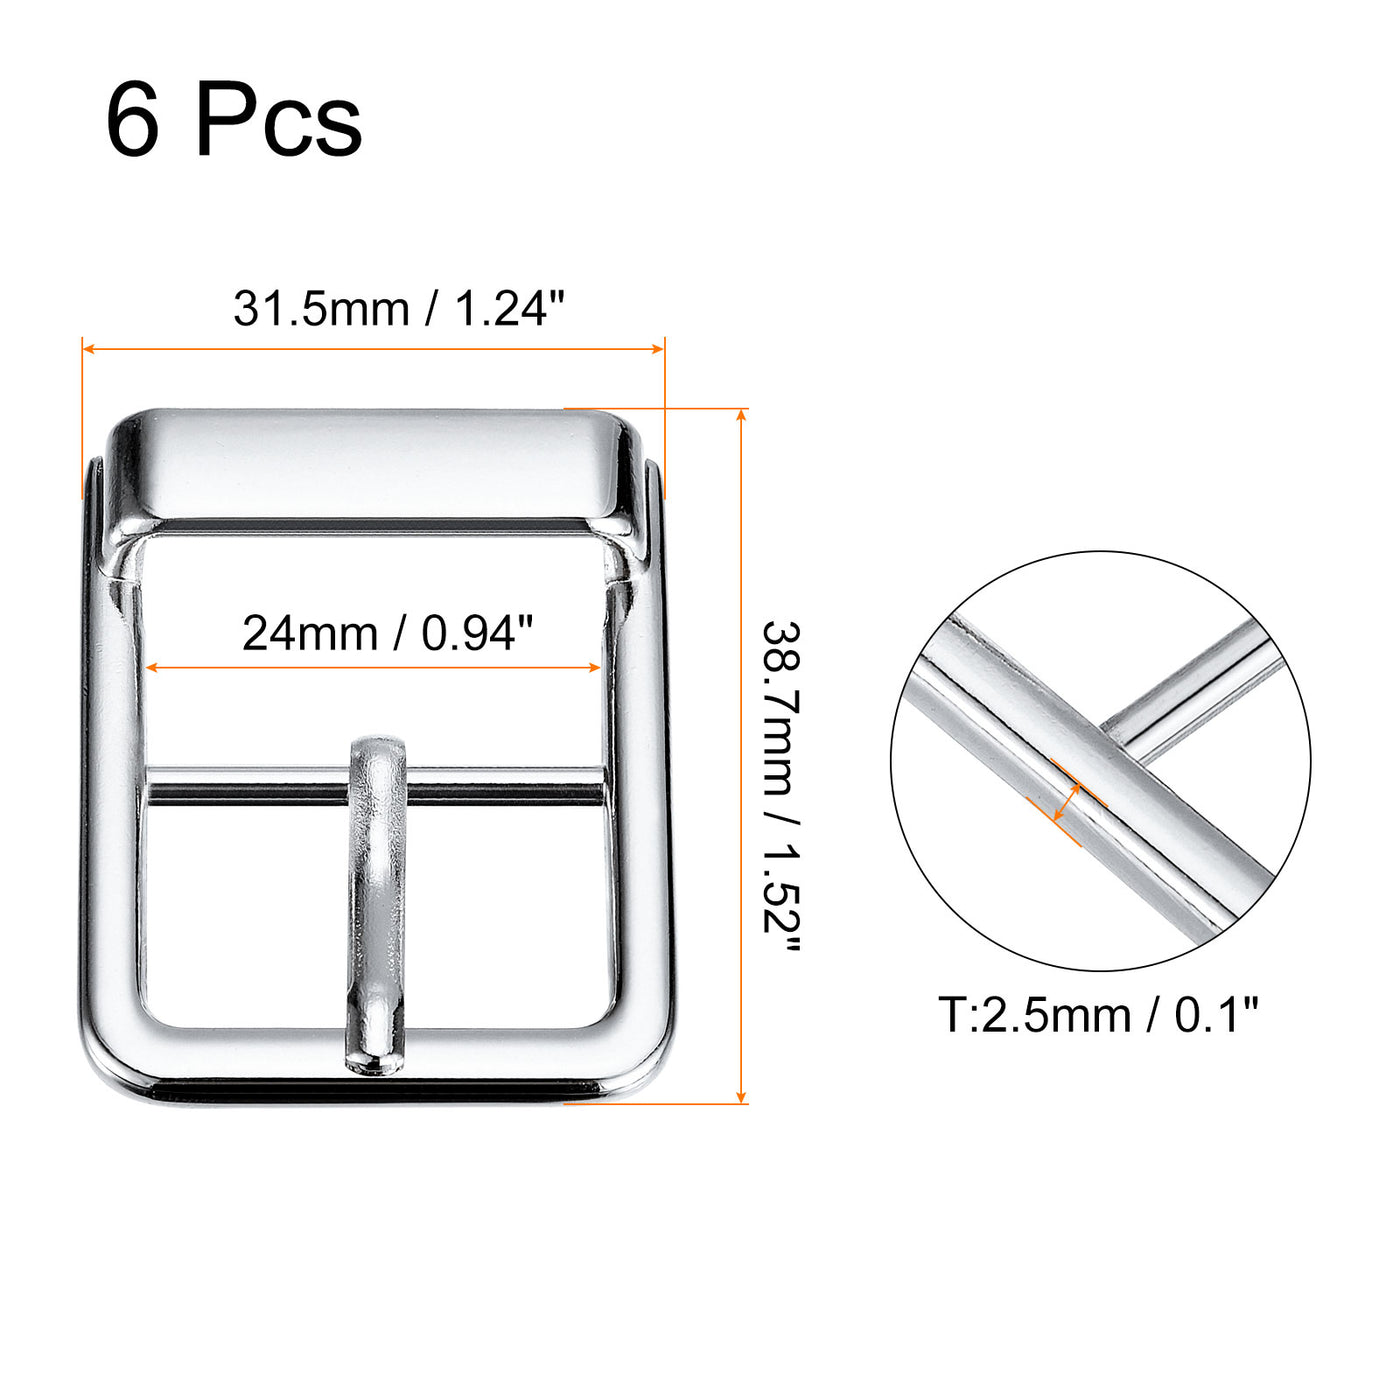 uxcell Uxcell 6Pcs 0.94" Single Prong Belt Buckle Square Center Bar Buckles for Belt, White